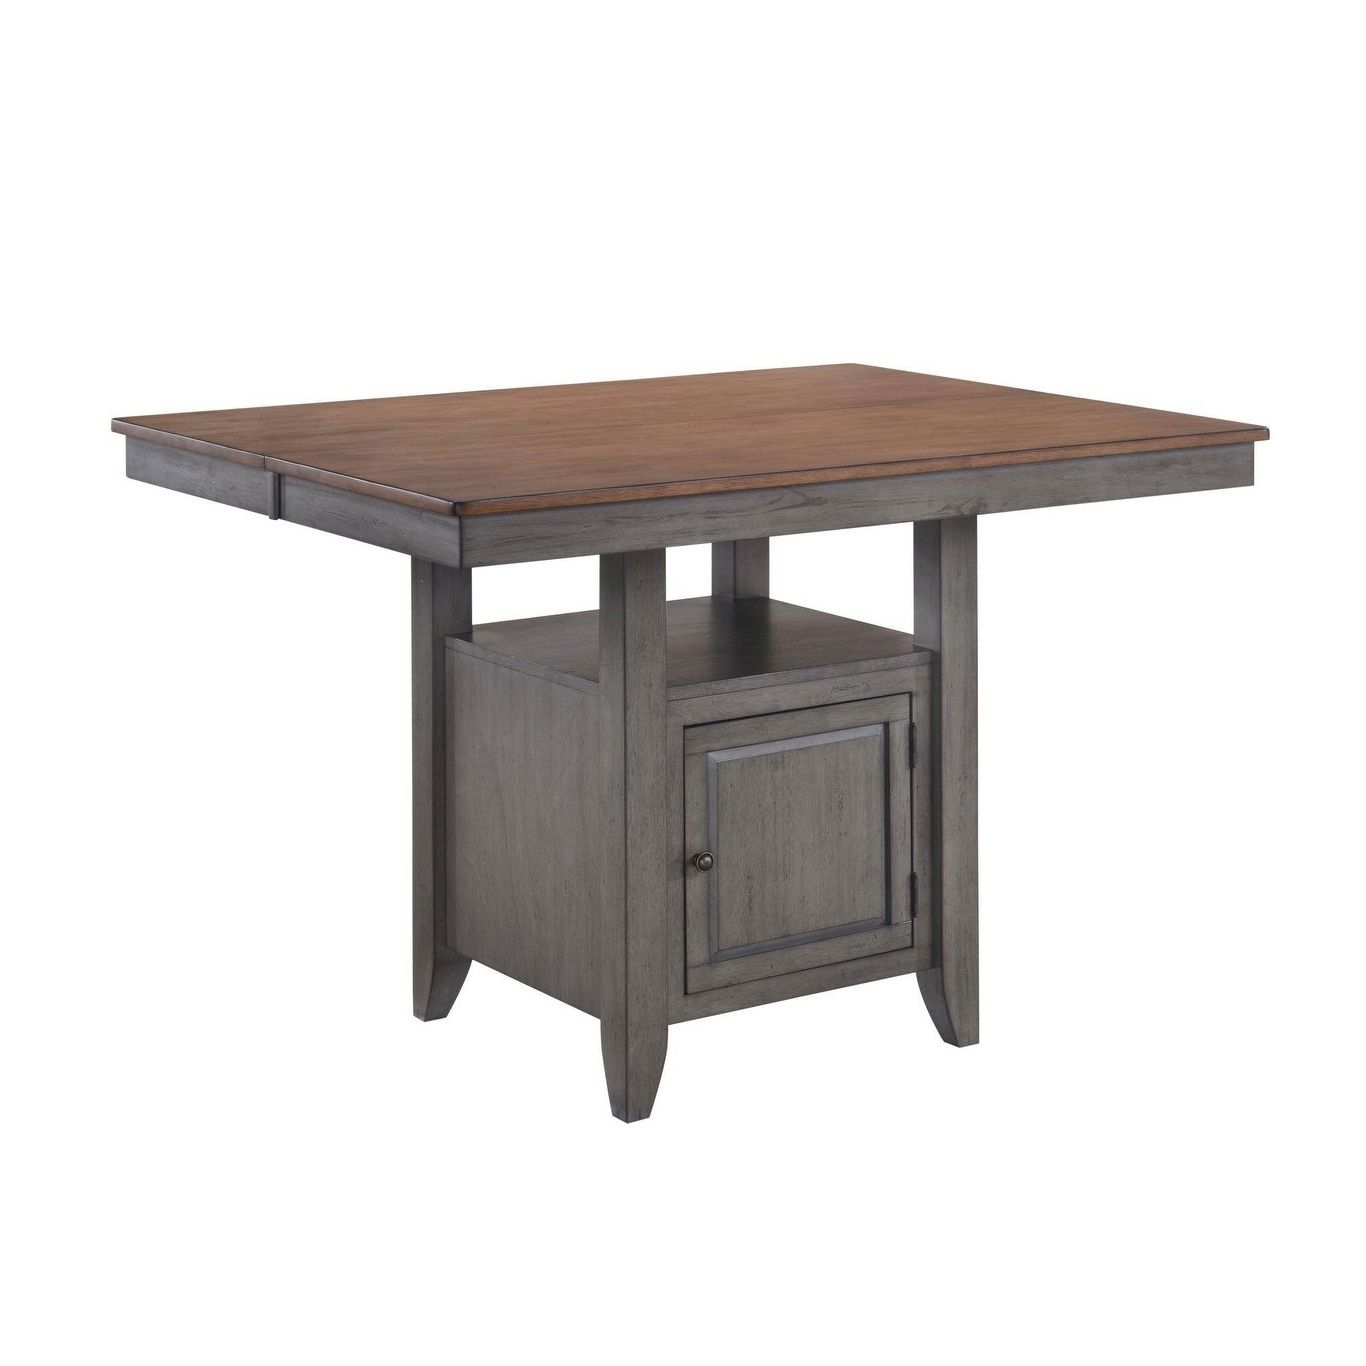 Saint Pete Storm Grey And Maple Rectangular Gathering Inside Popular Drake Maple Solid Wood Dining Tables (View 1 of 20)